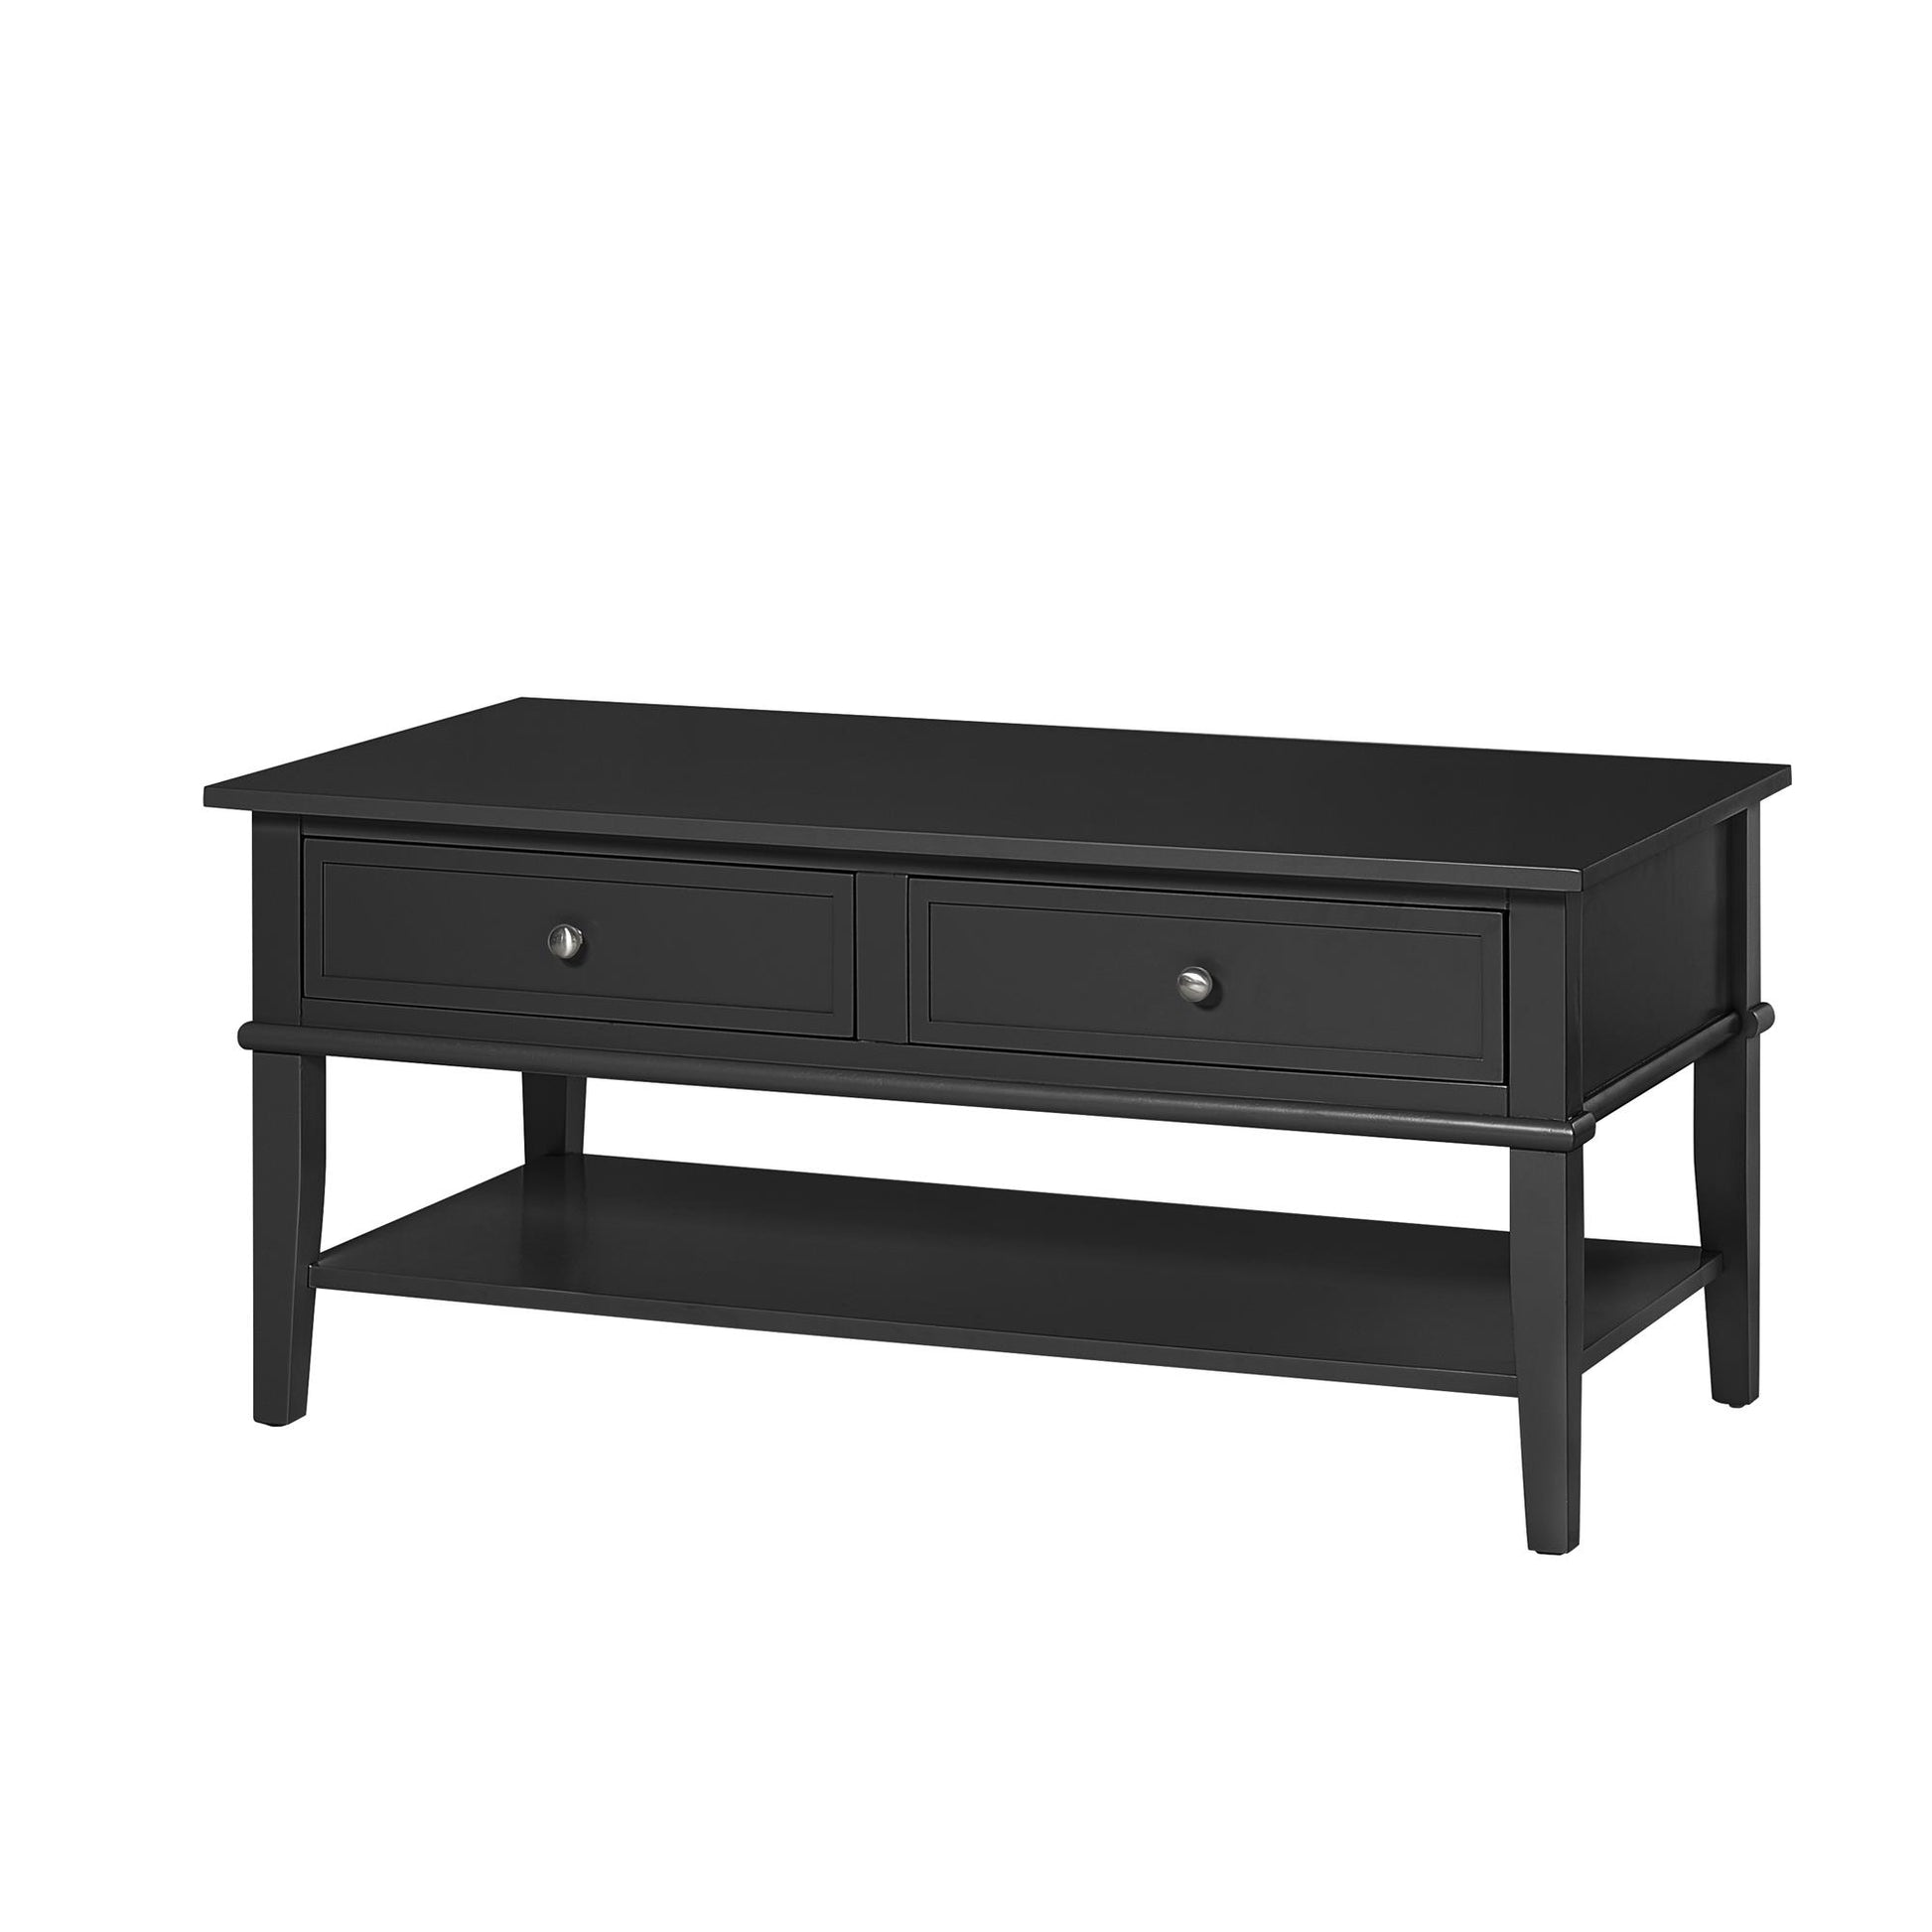 Franklin Coffee Table with 2 Drawers and Shelf - Black